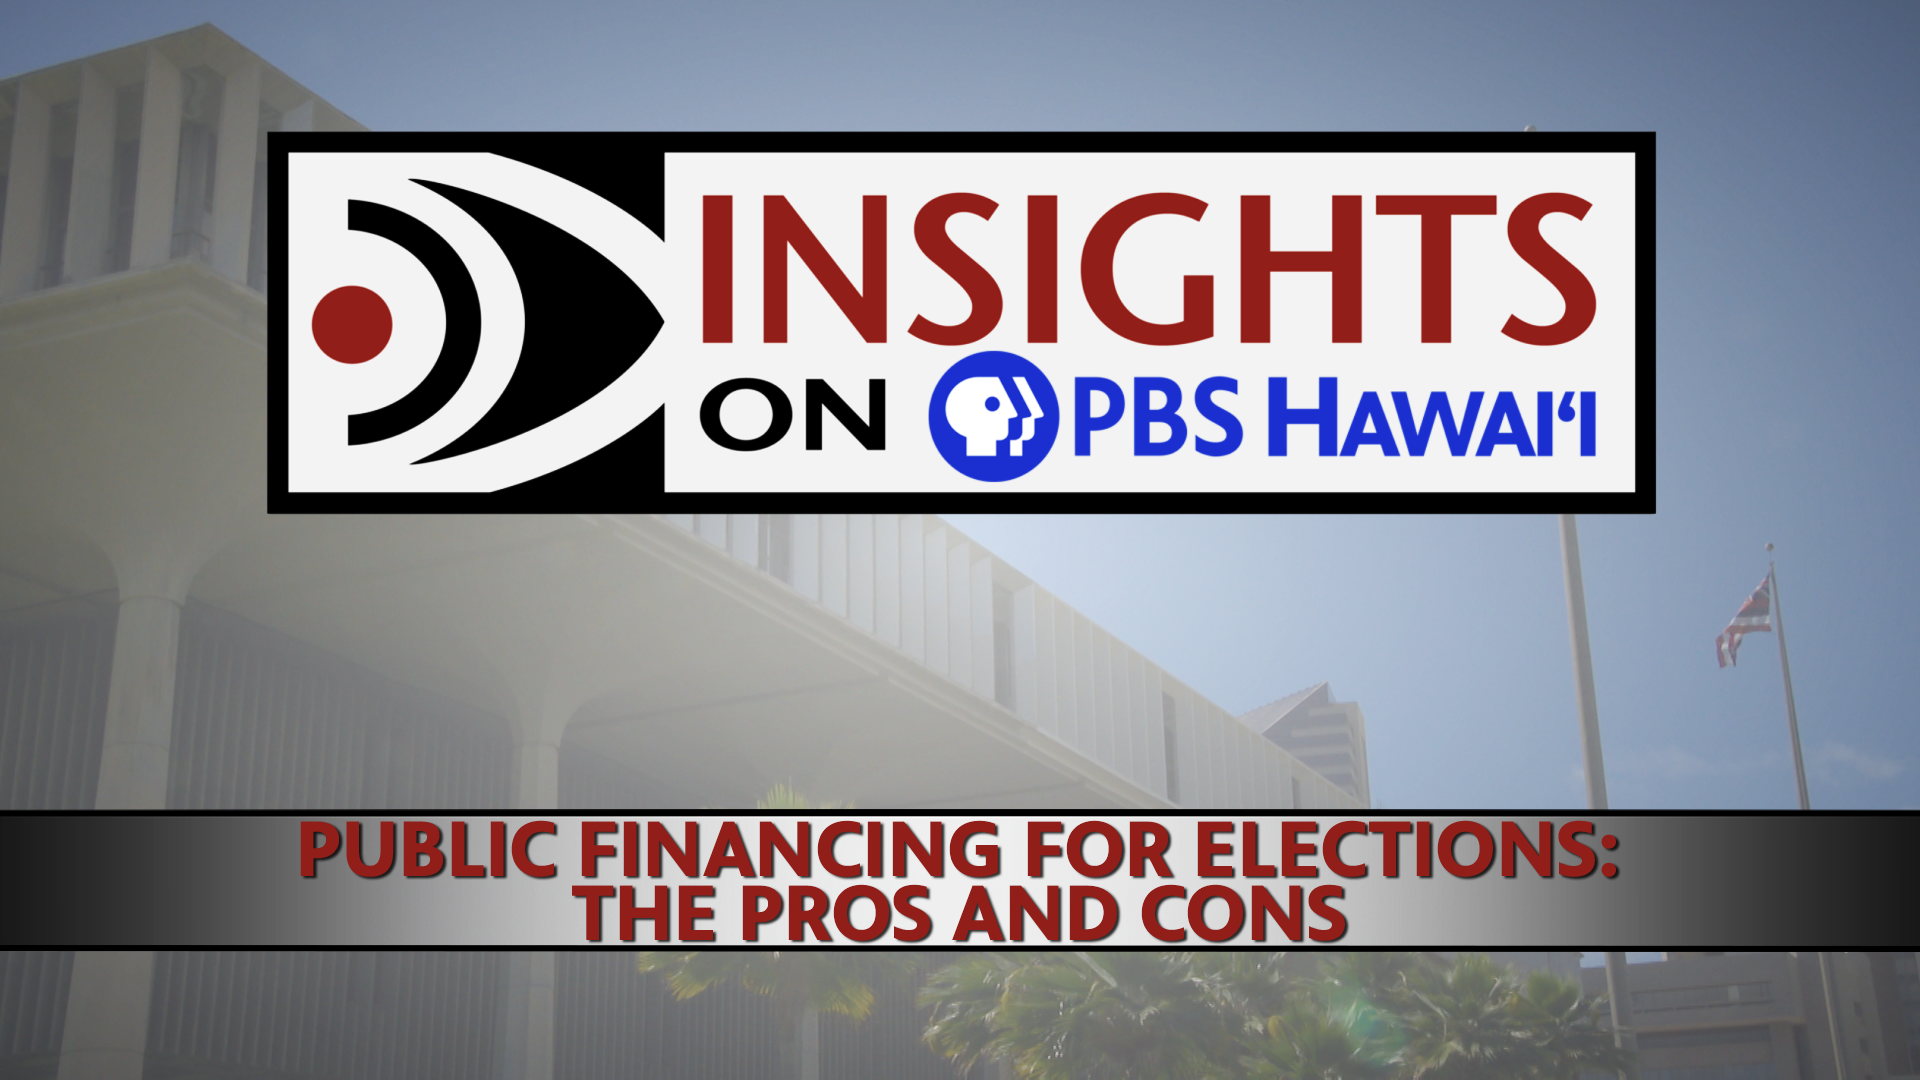 INSIGHTS ON PBS HAWAIʻI <br/>Public Financing for Elections &#8211; The Pros and Cons